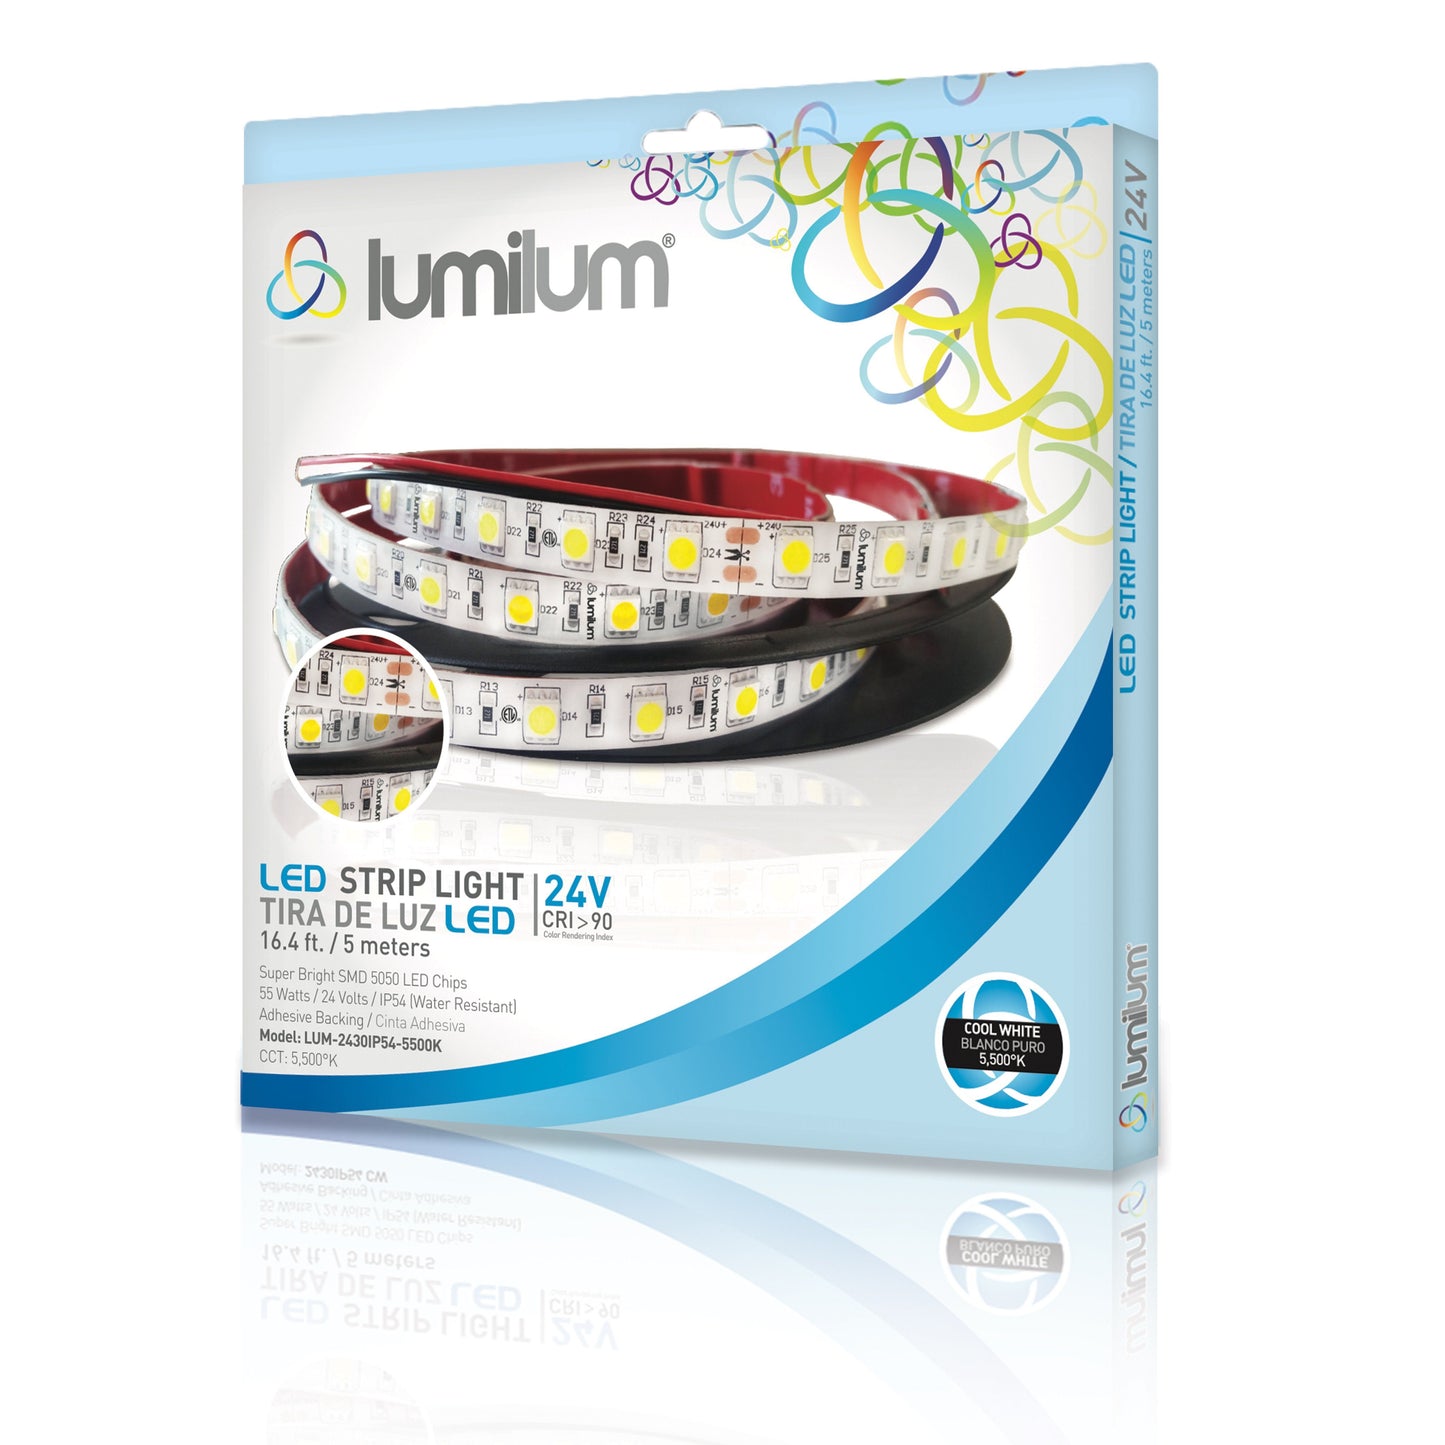 Load image into Gallery viewer, lumilum brand blue led strip light packaging with strip light image and 5500k product information text
